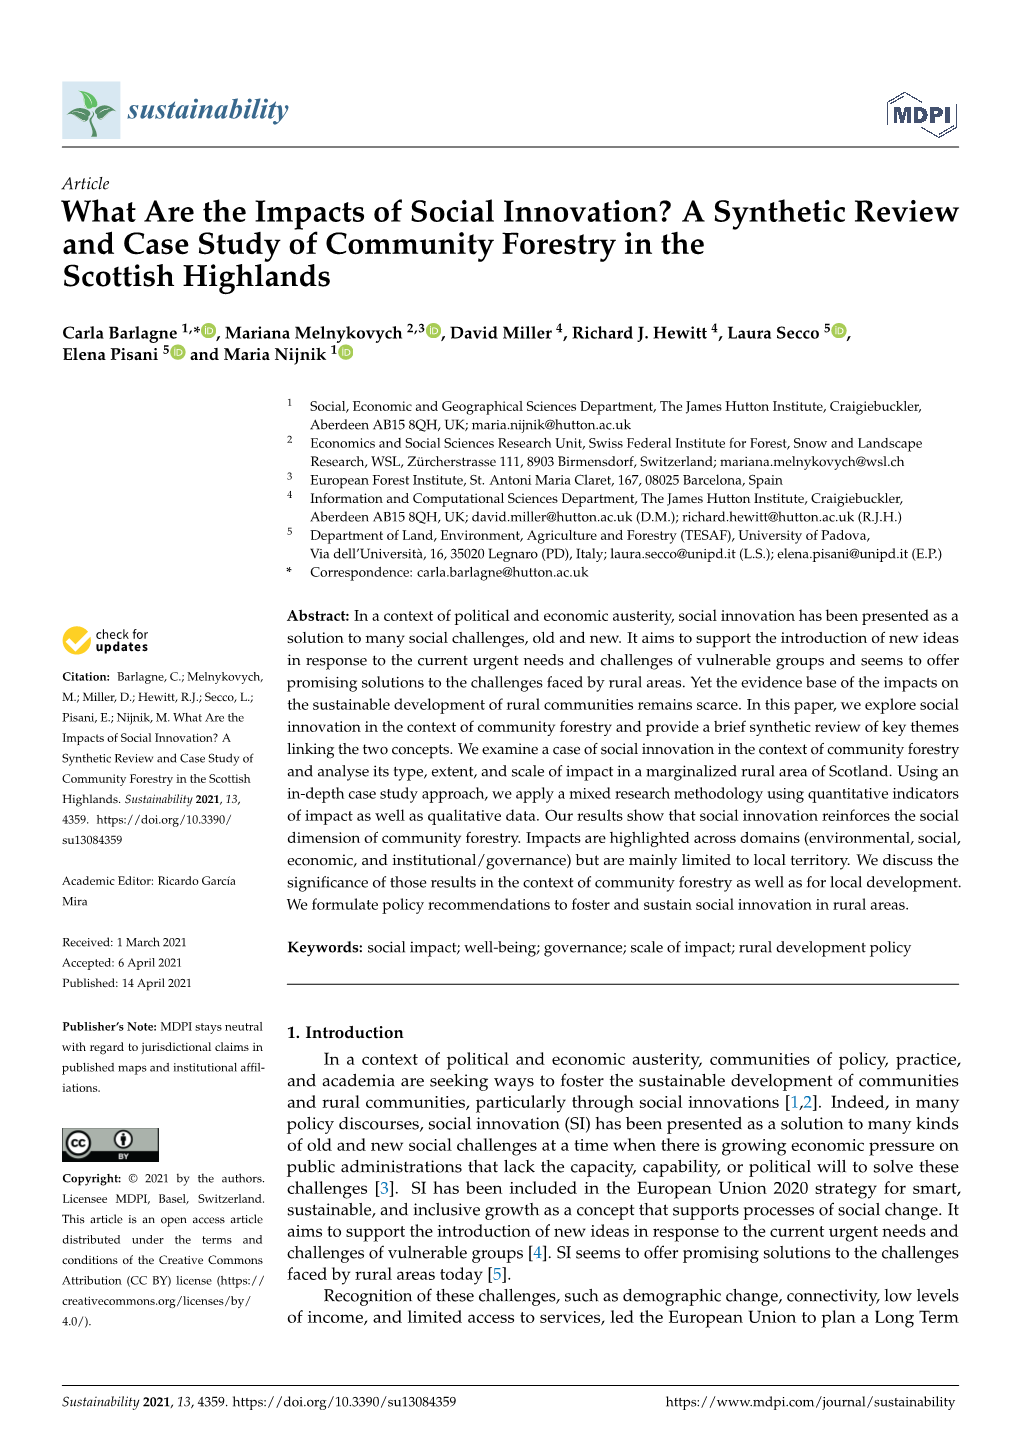 What Are the Impacts of Social Innovation? a Synthetic Review and Case Study of Community Forestry in the Scottish Highlands